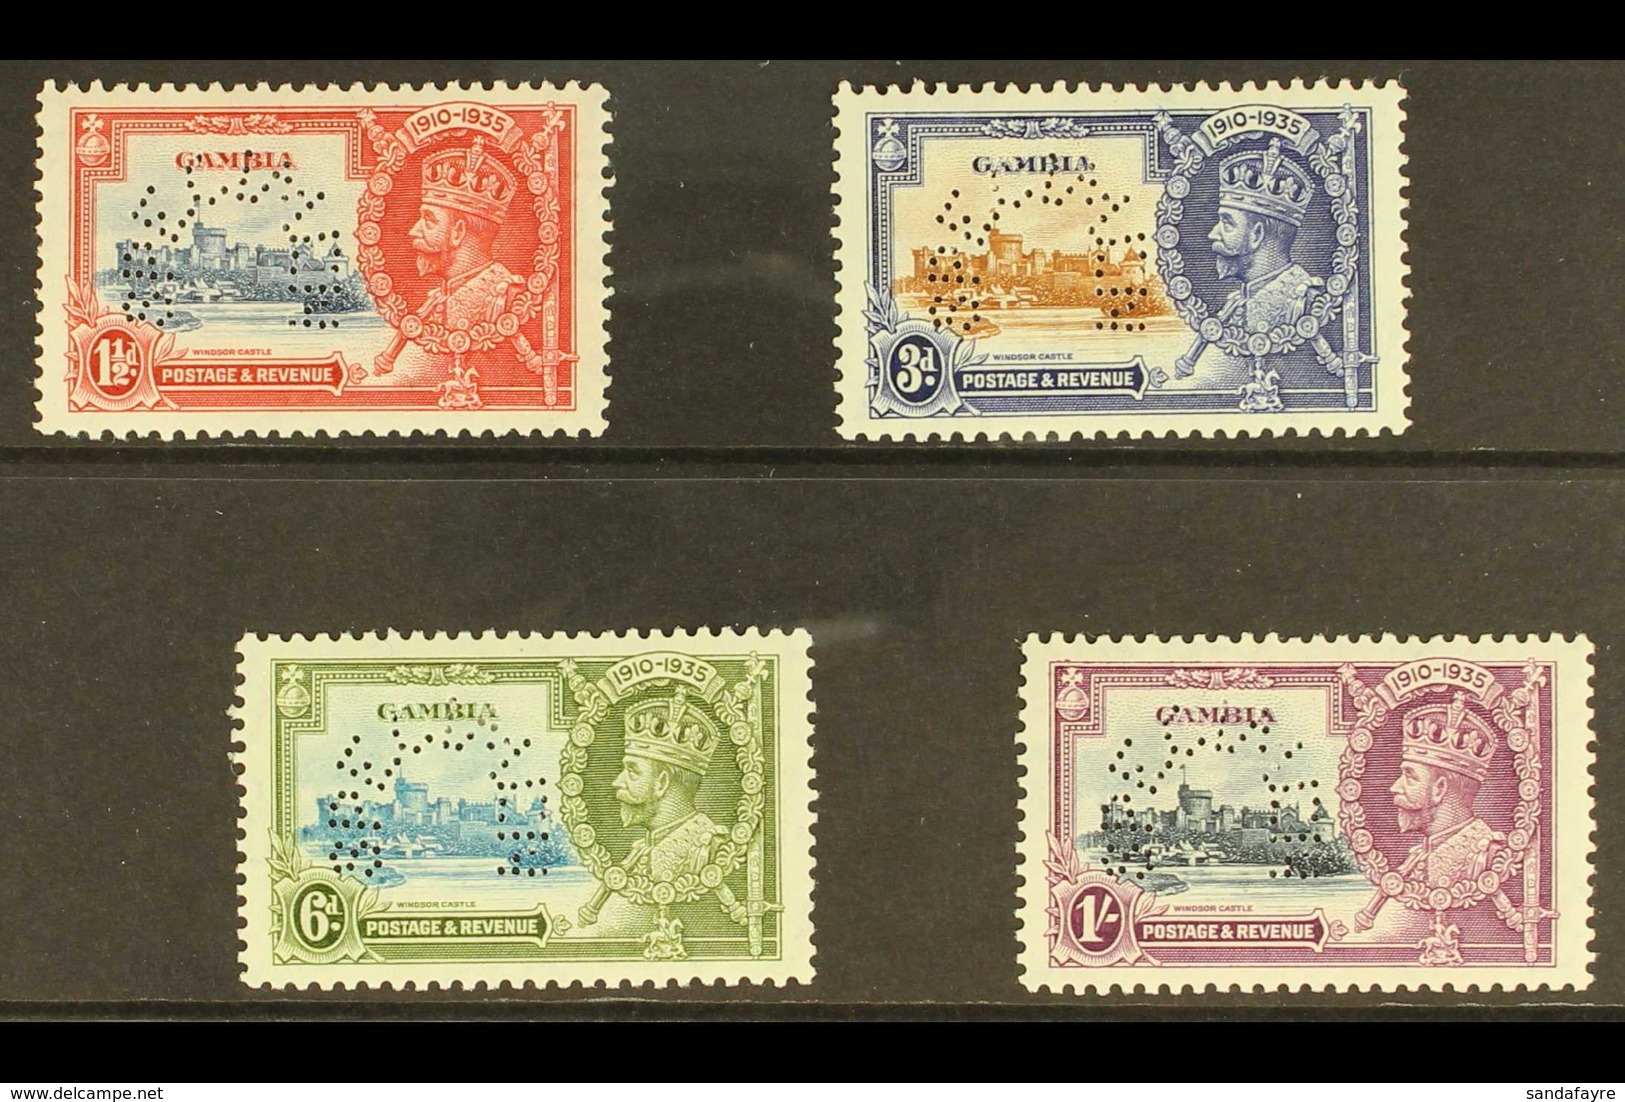 1935 Silver Jubilee Set Complete, Perforated "Specimen", SG 143s/6s, Very Fine Mint. (4 Stamps) For More Images, Please  - Gambia (...-1964)